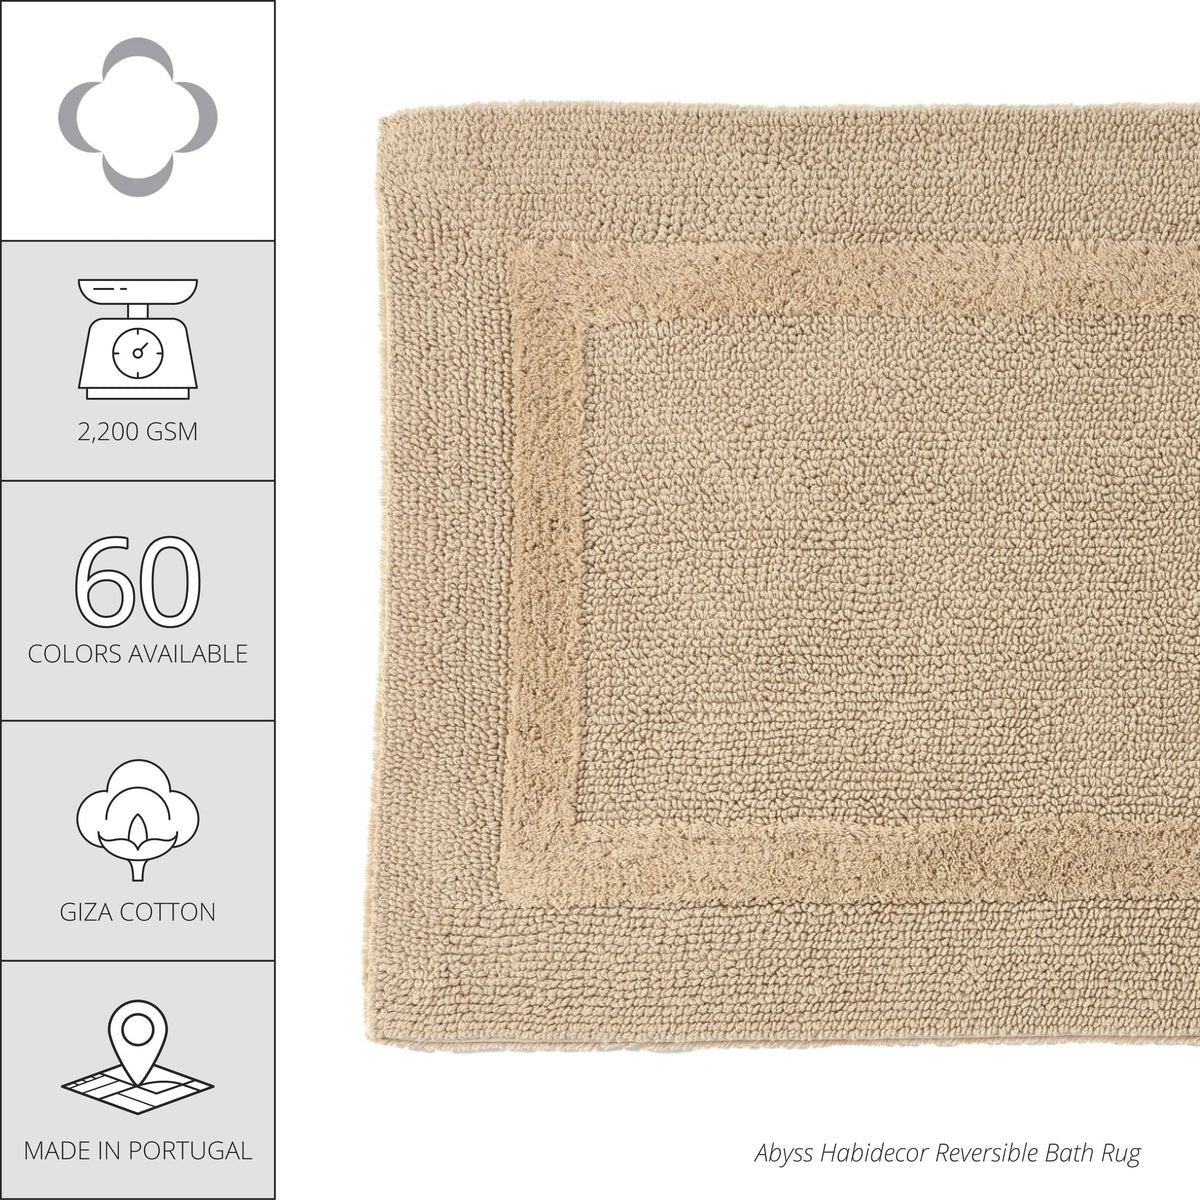 Infographic of Abyss Habidecor Reversible Bath Rug